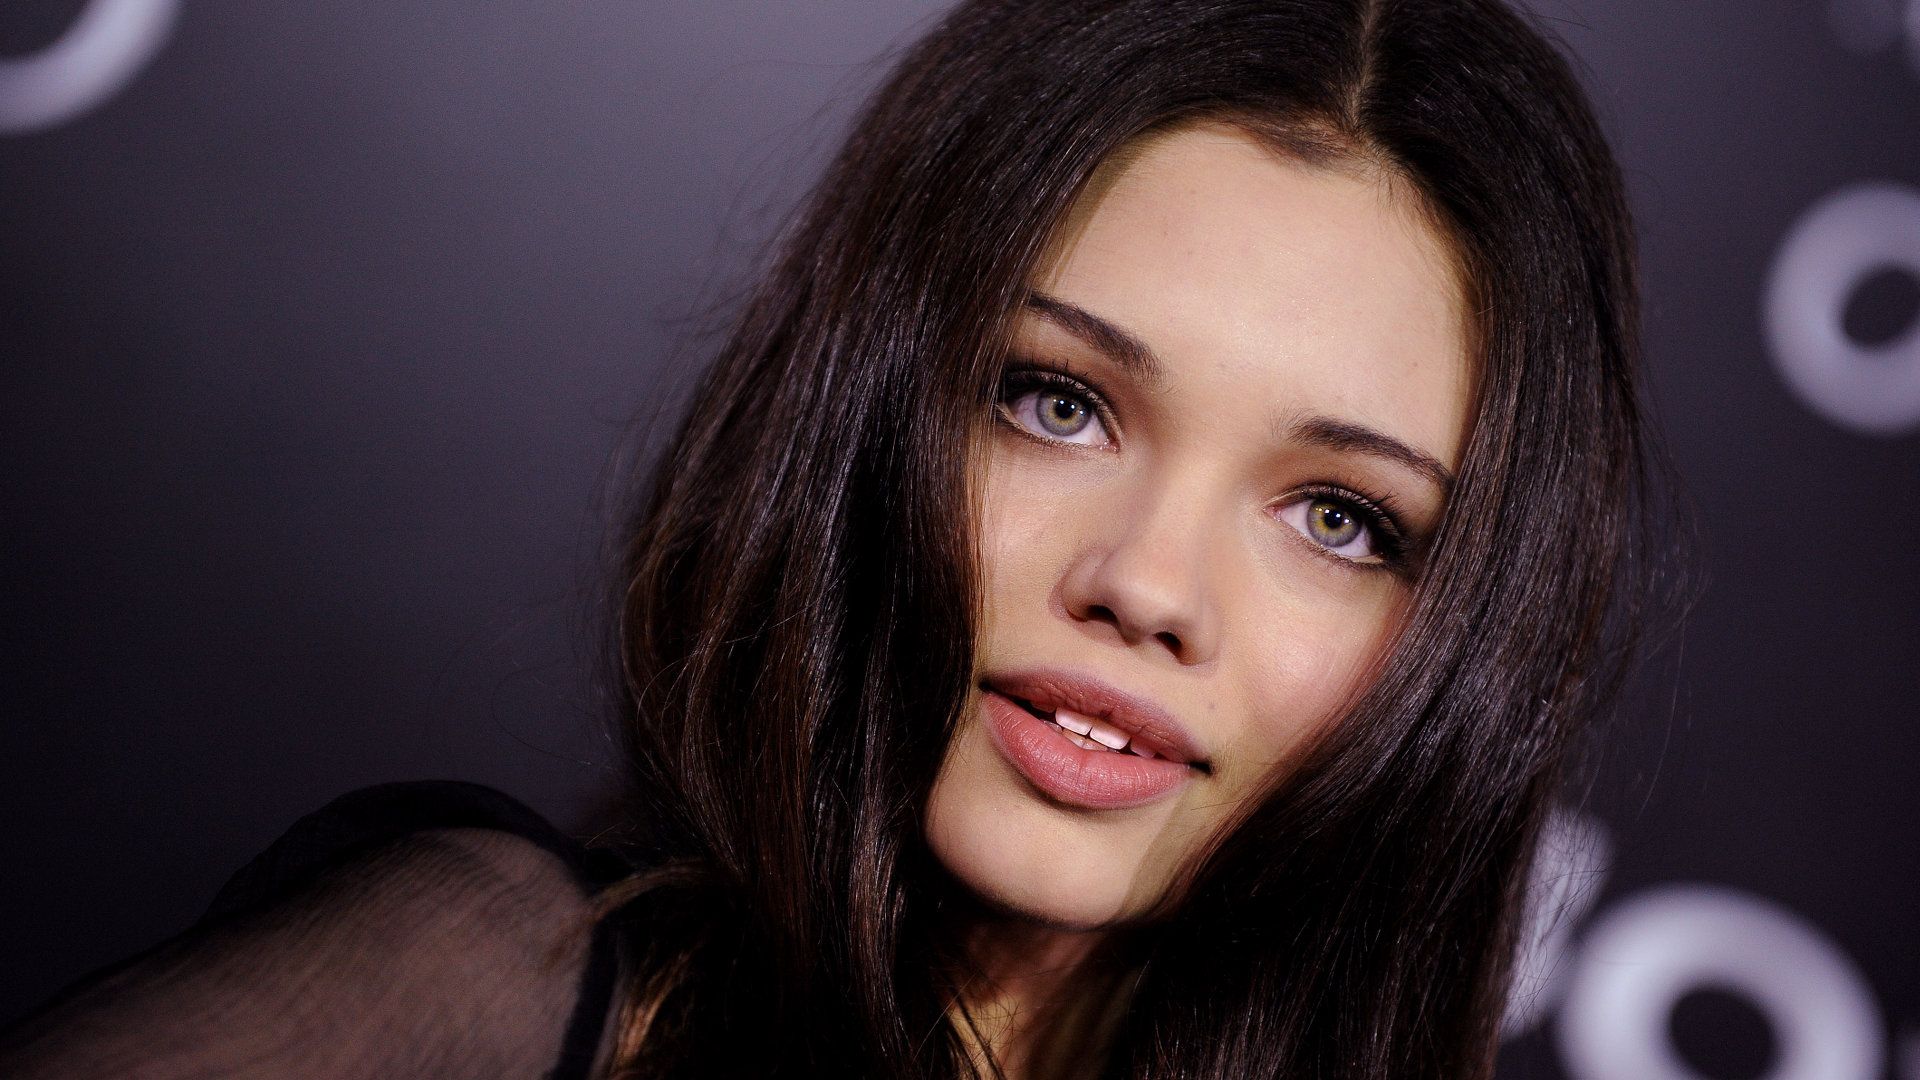 India Eisley Plastic Surgery – Lips, Nose Job, Body Measurements, and More!